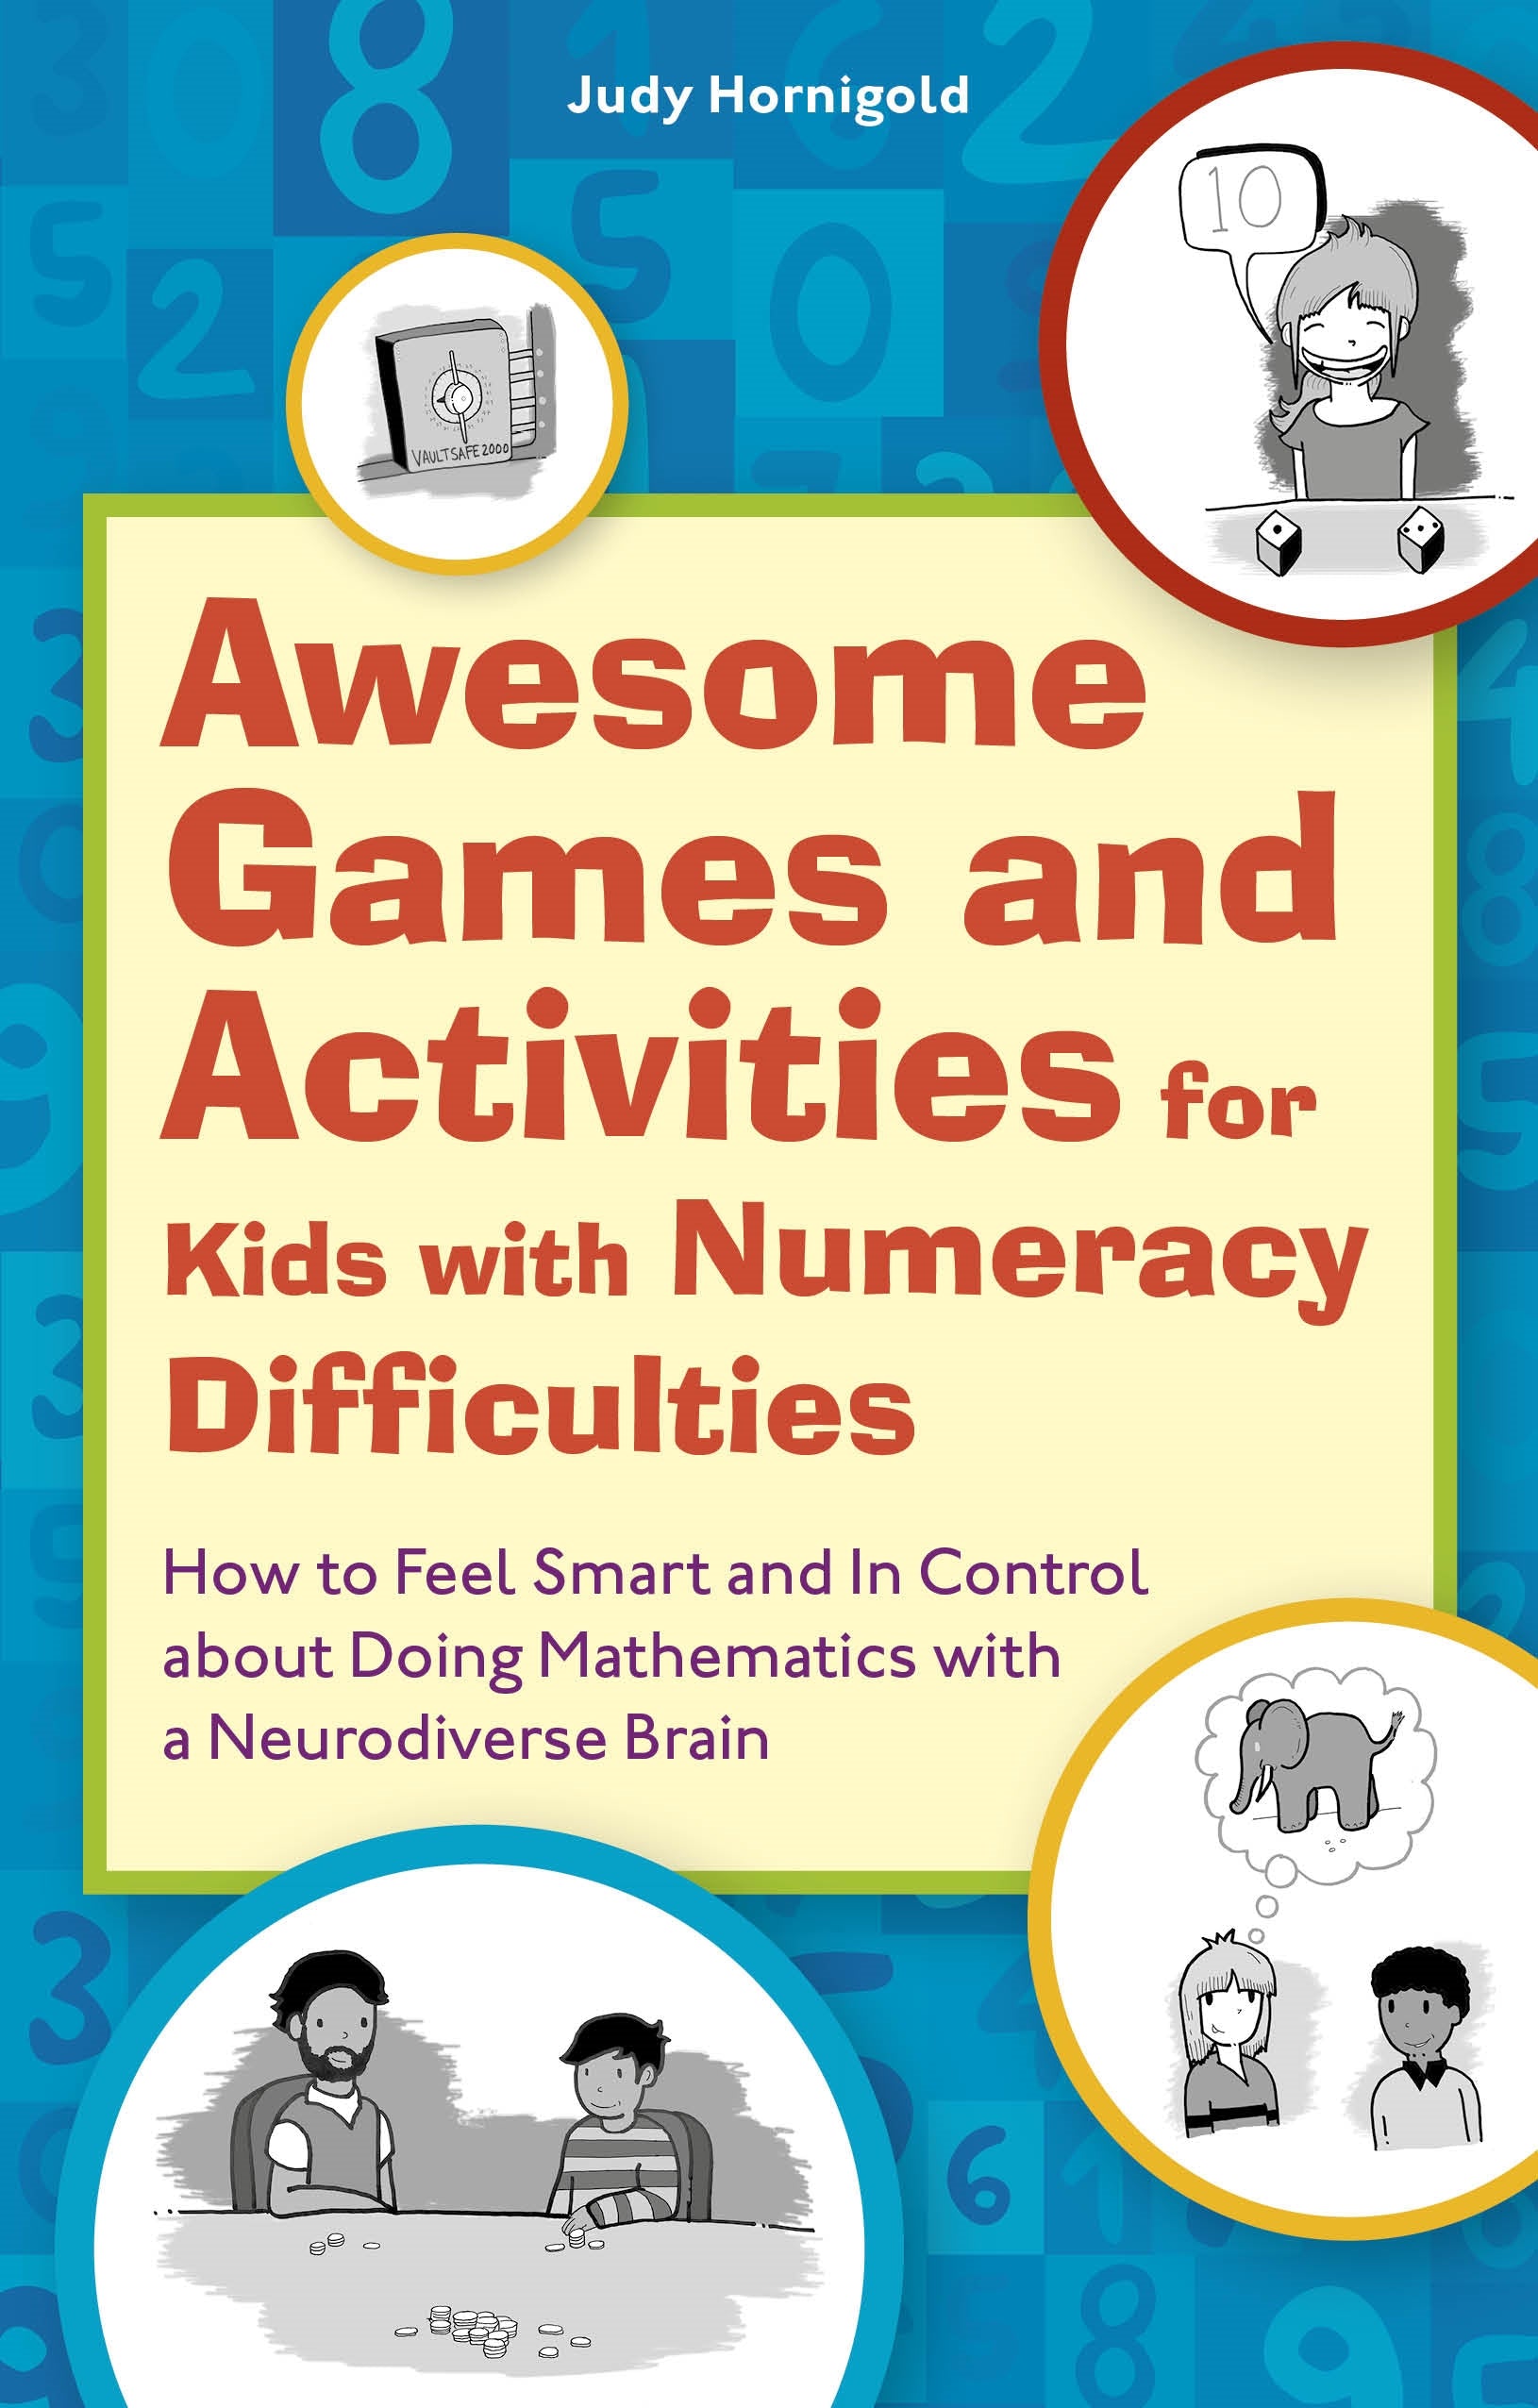 Awesome Games and Activities for Kids with Numeracy Difficulties by Judy Hornigold, Joe Salerno